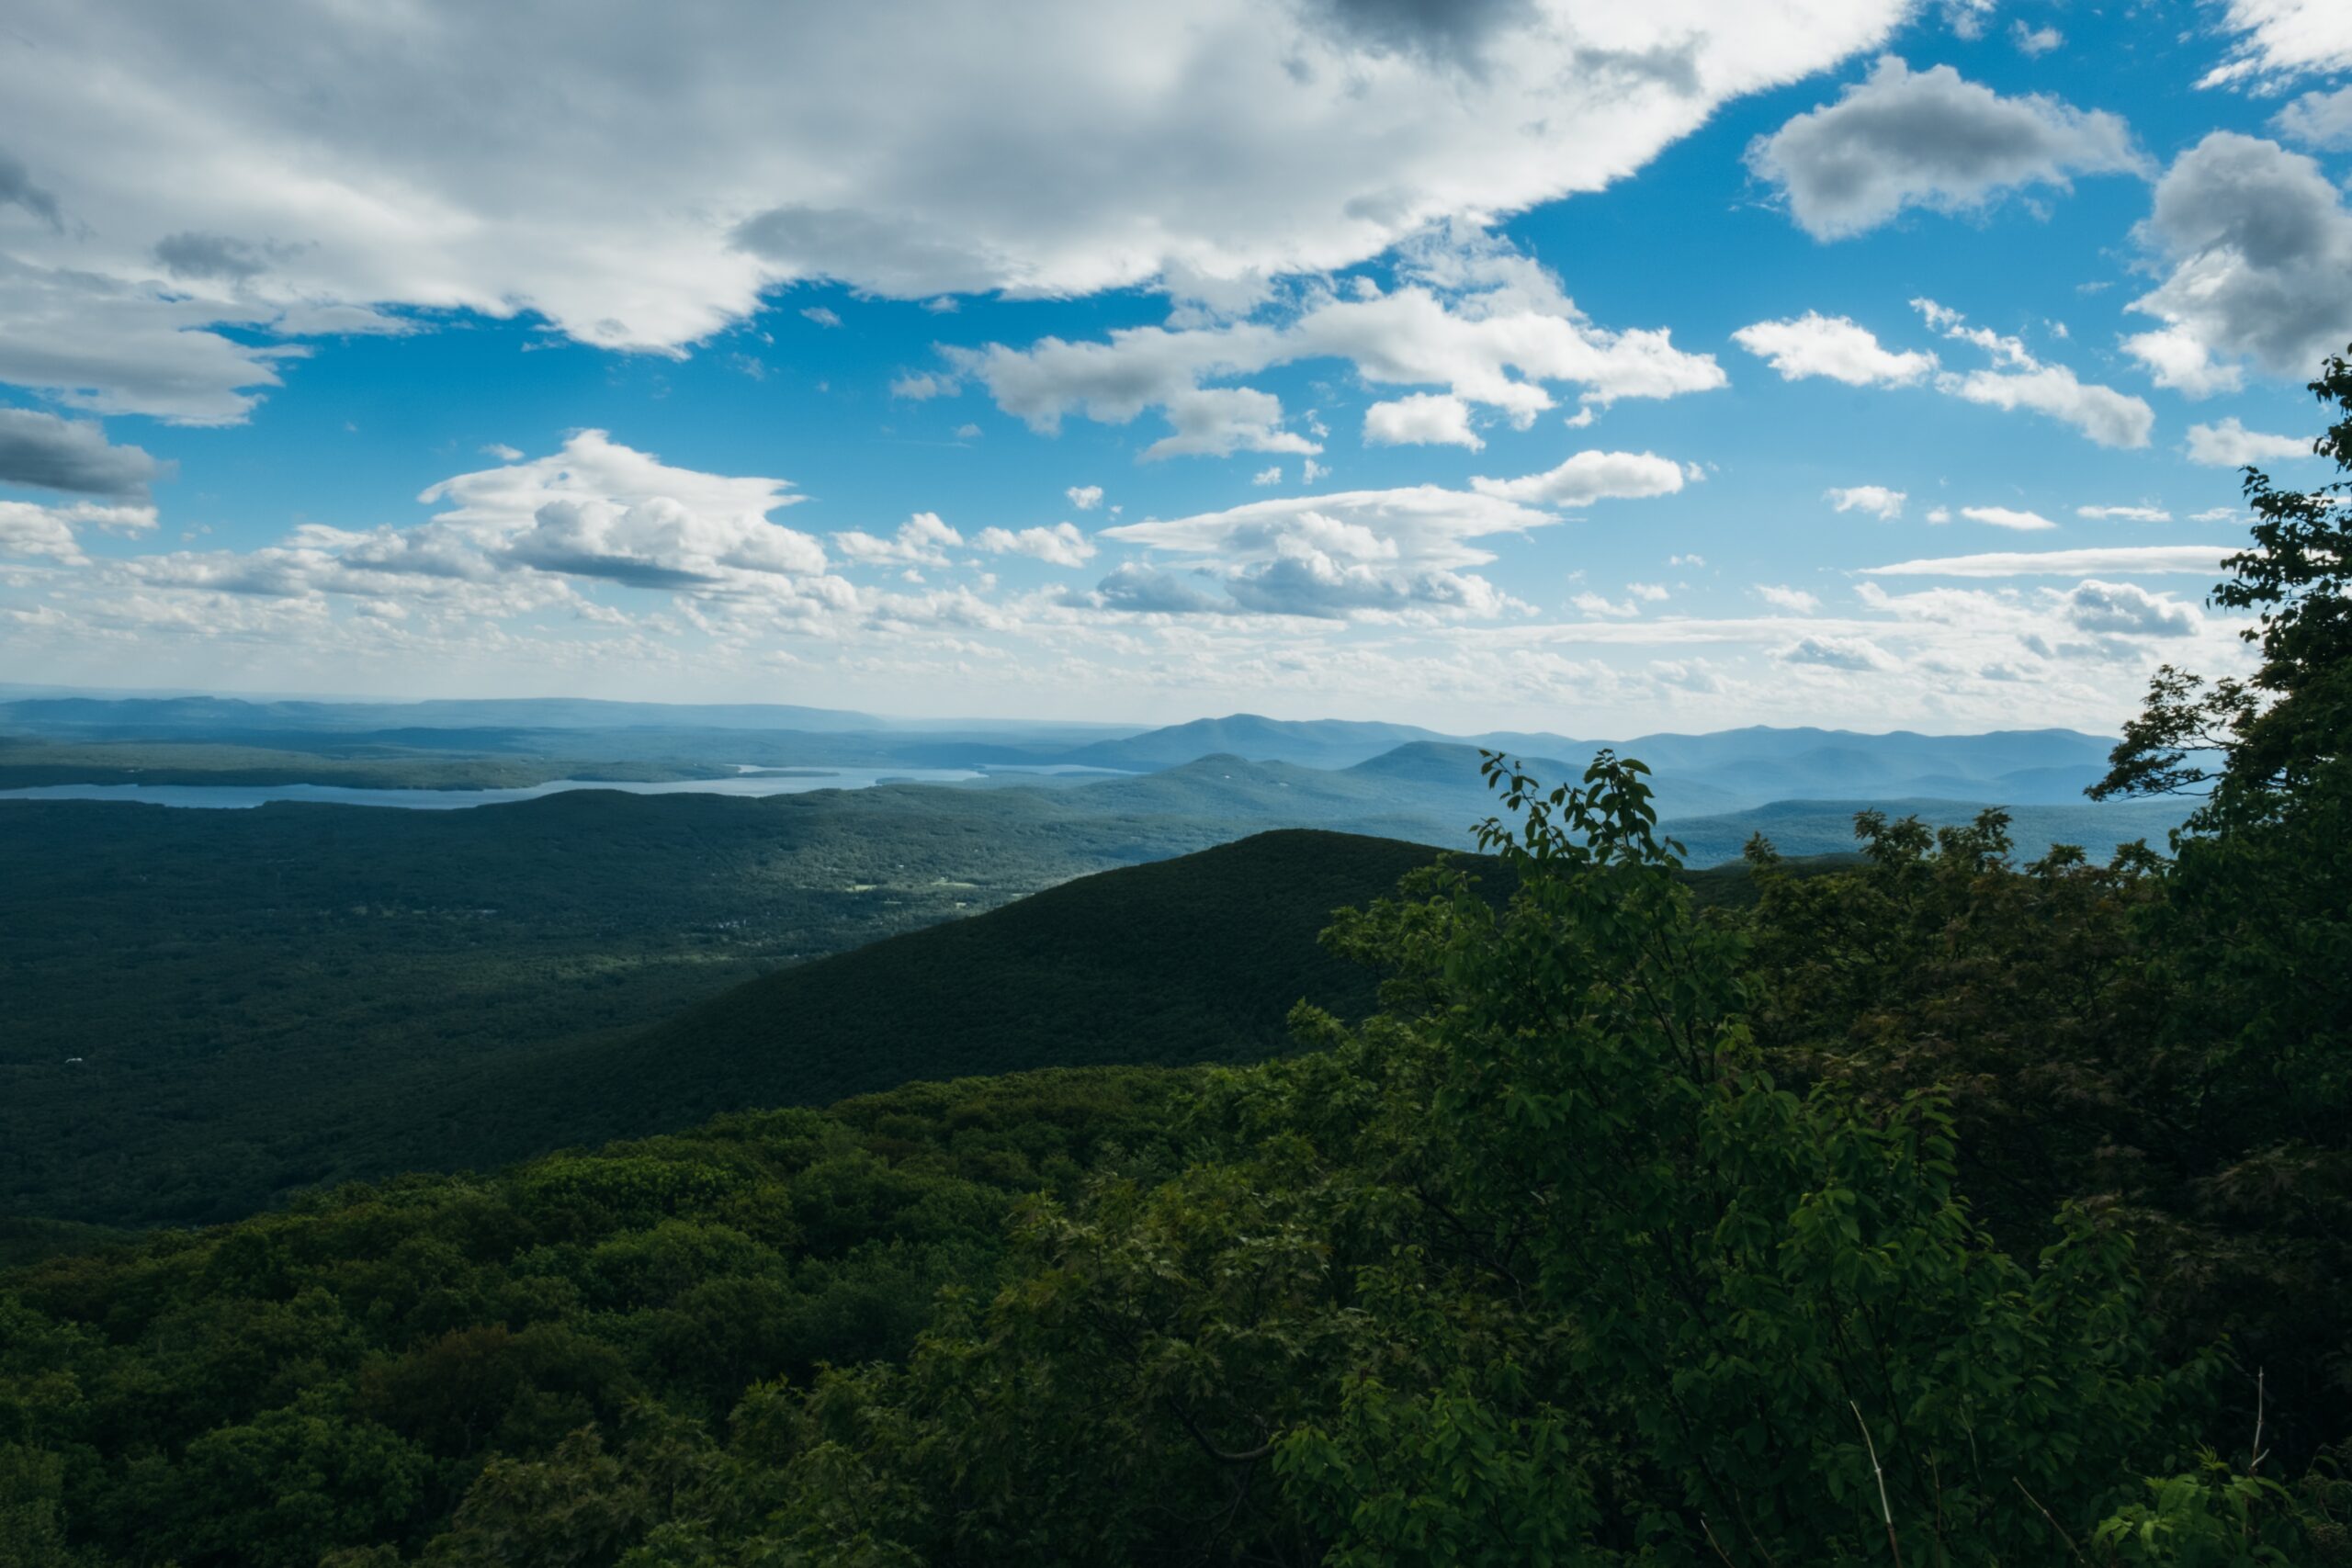 The Catskill Mountains under a cloudy sky